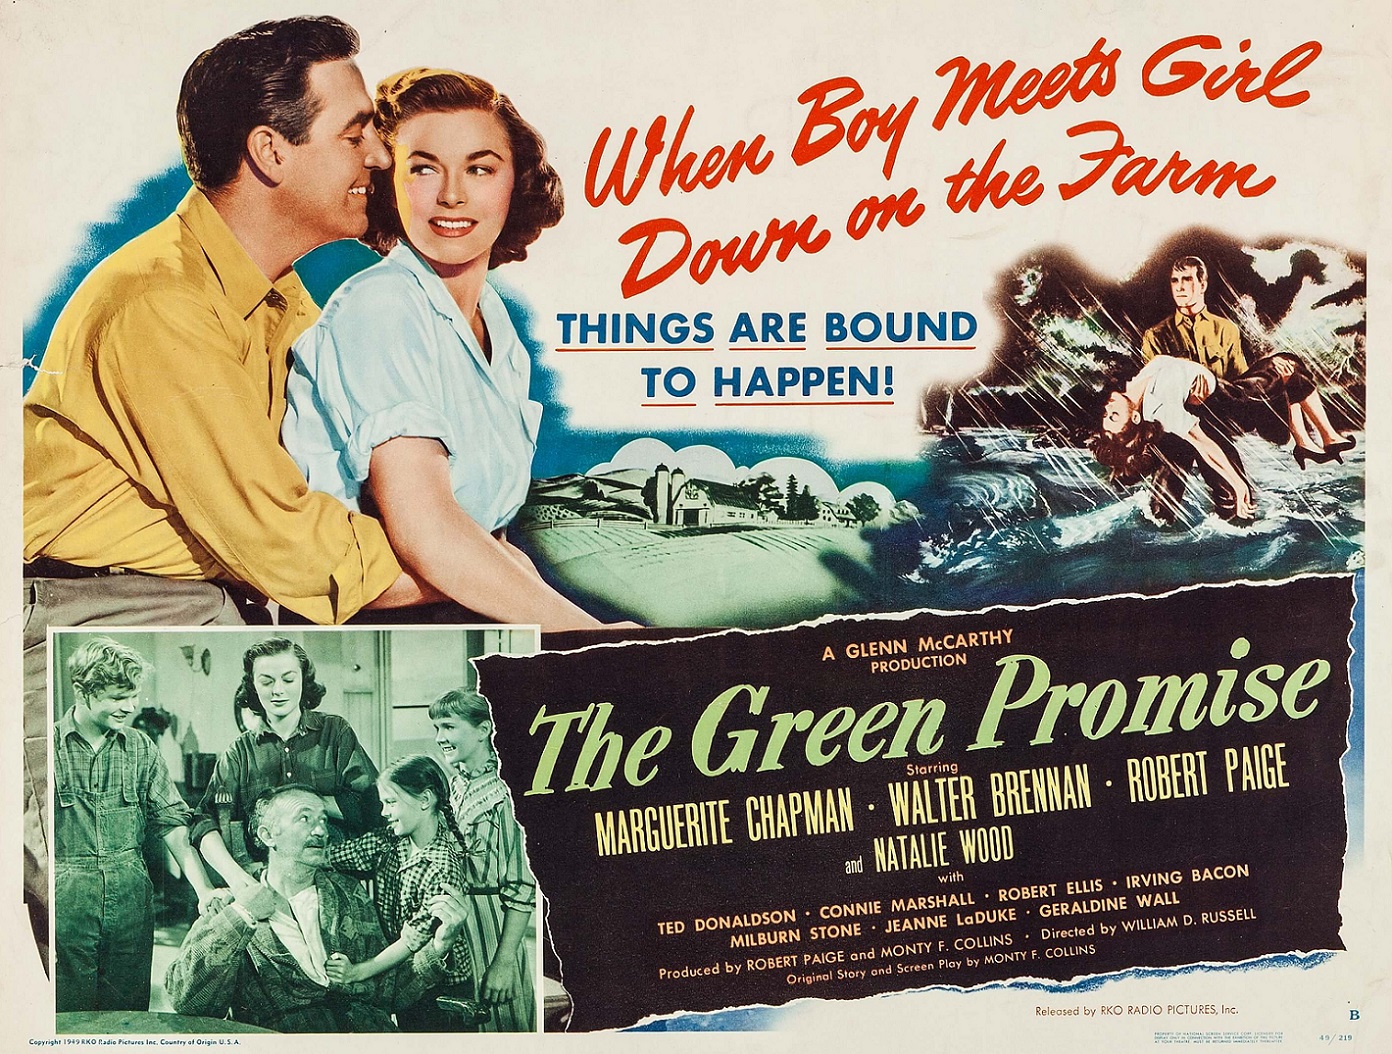 THE GREEN PROMISE (1949) WEB SITE